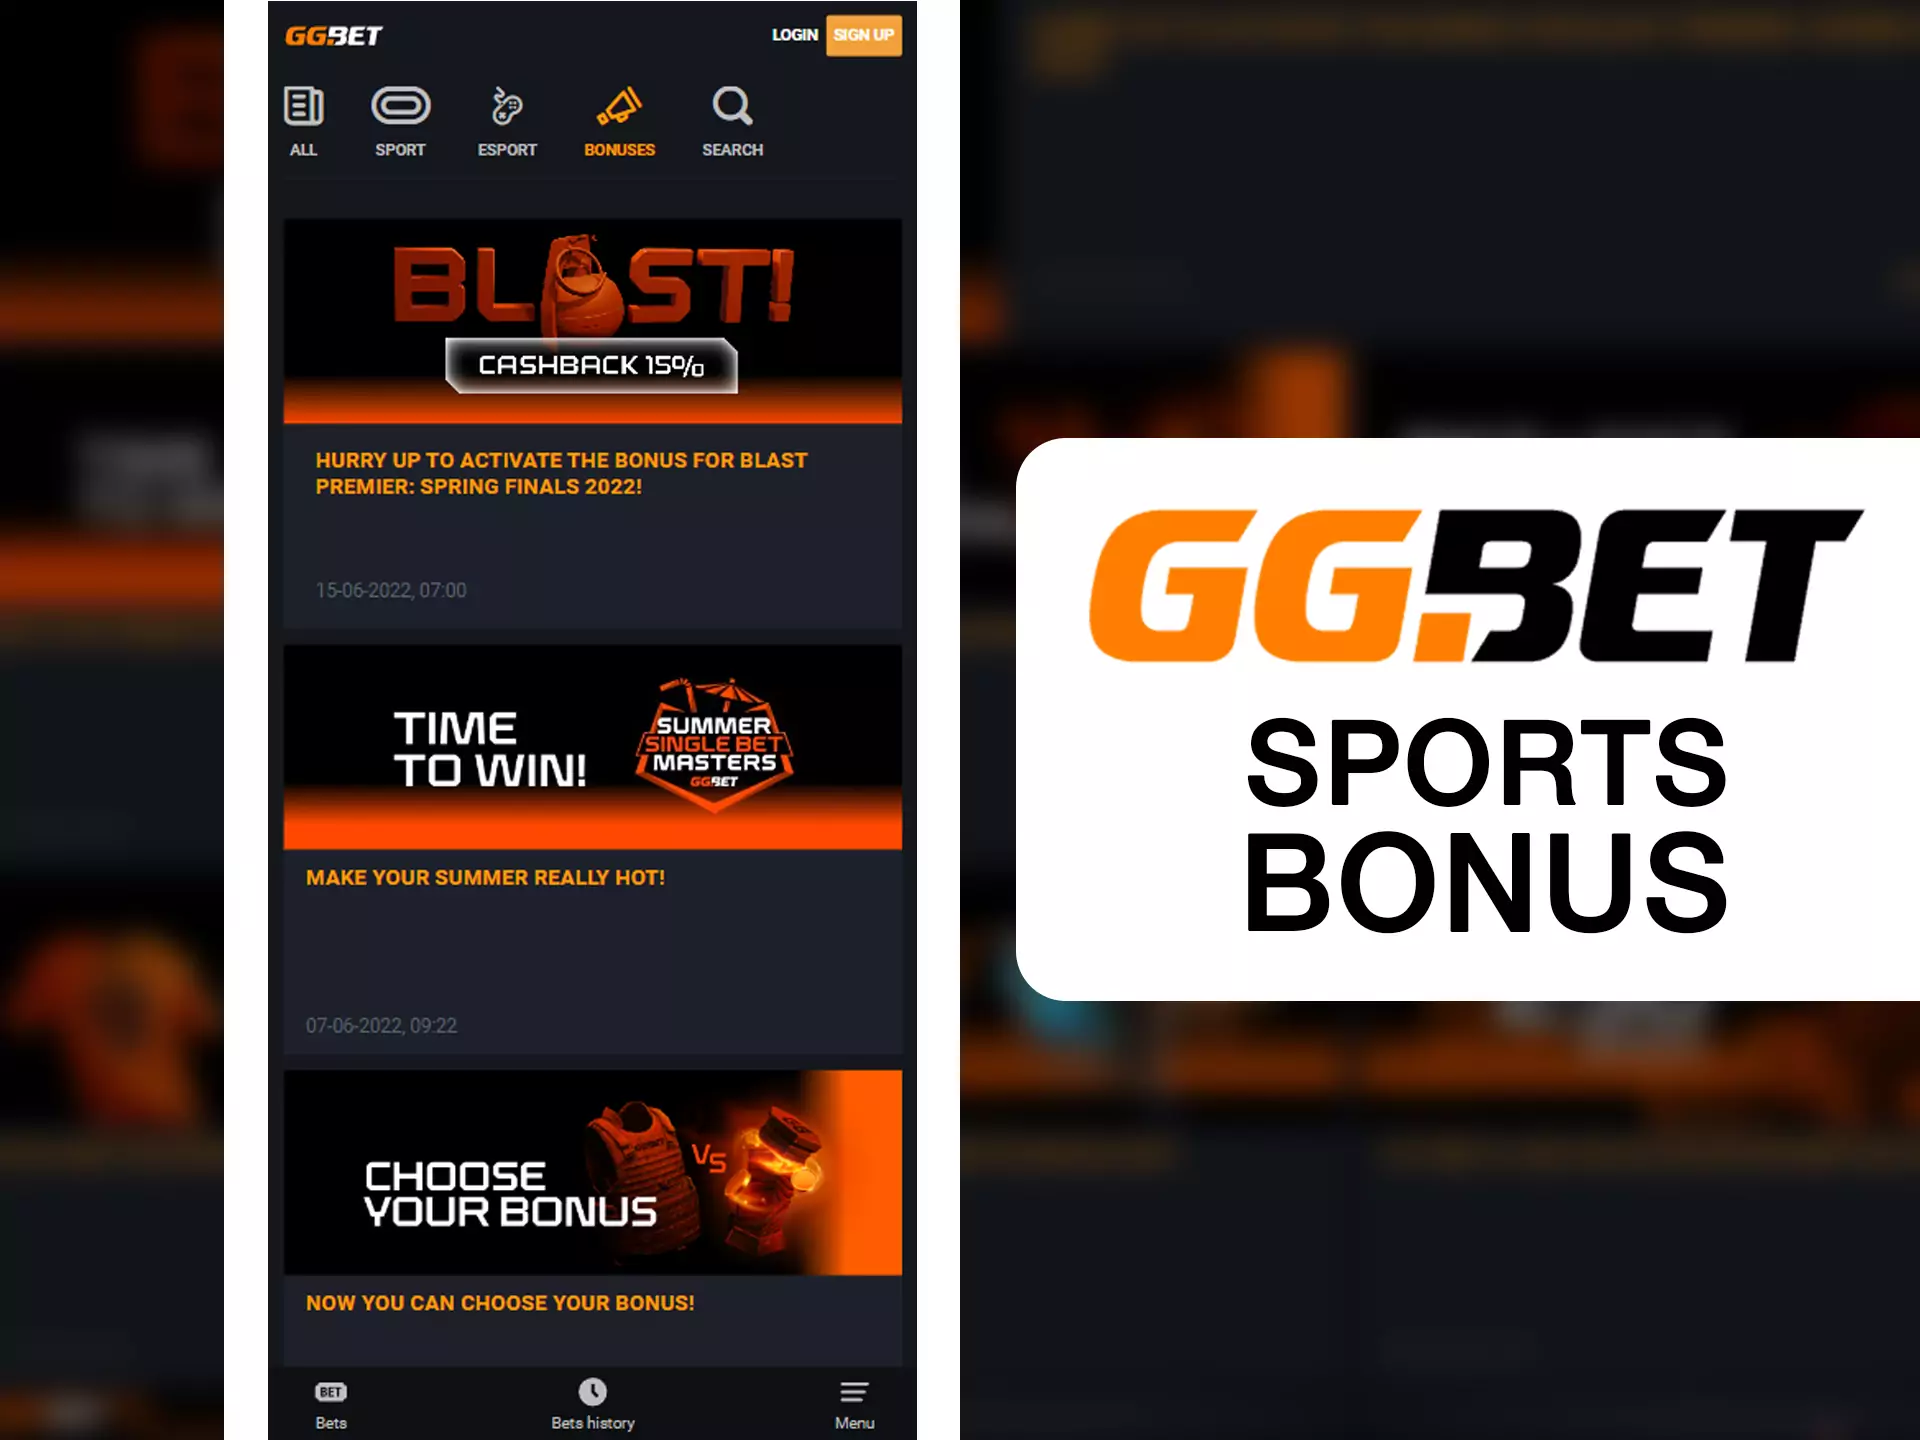 If you bet on sports at GGBet, you can claim your reward.